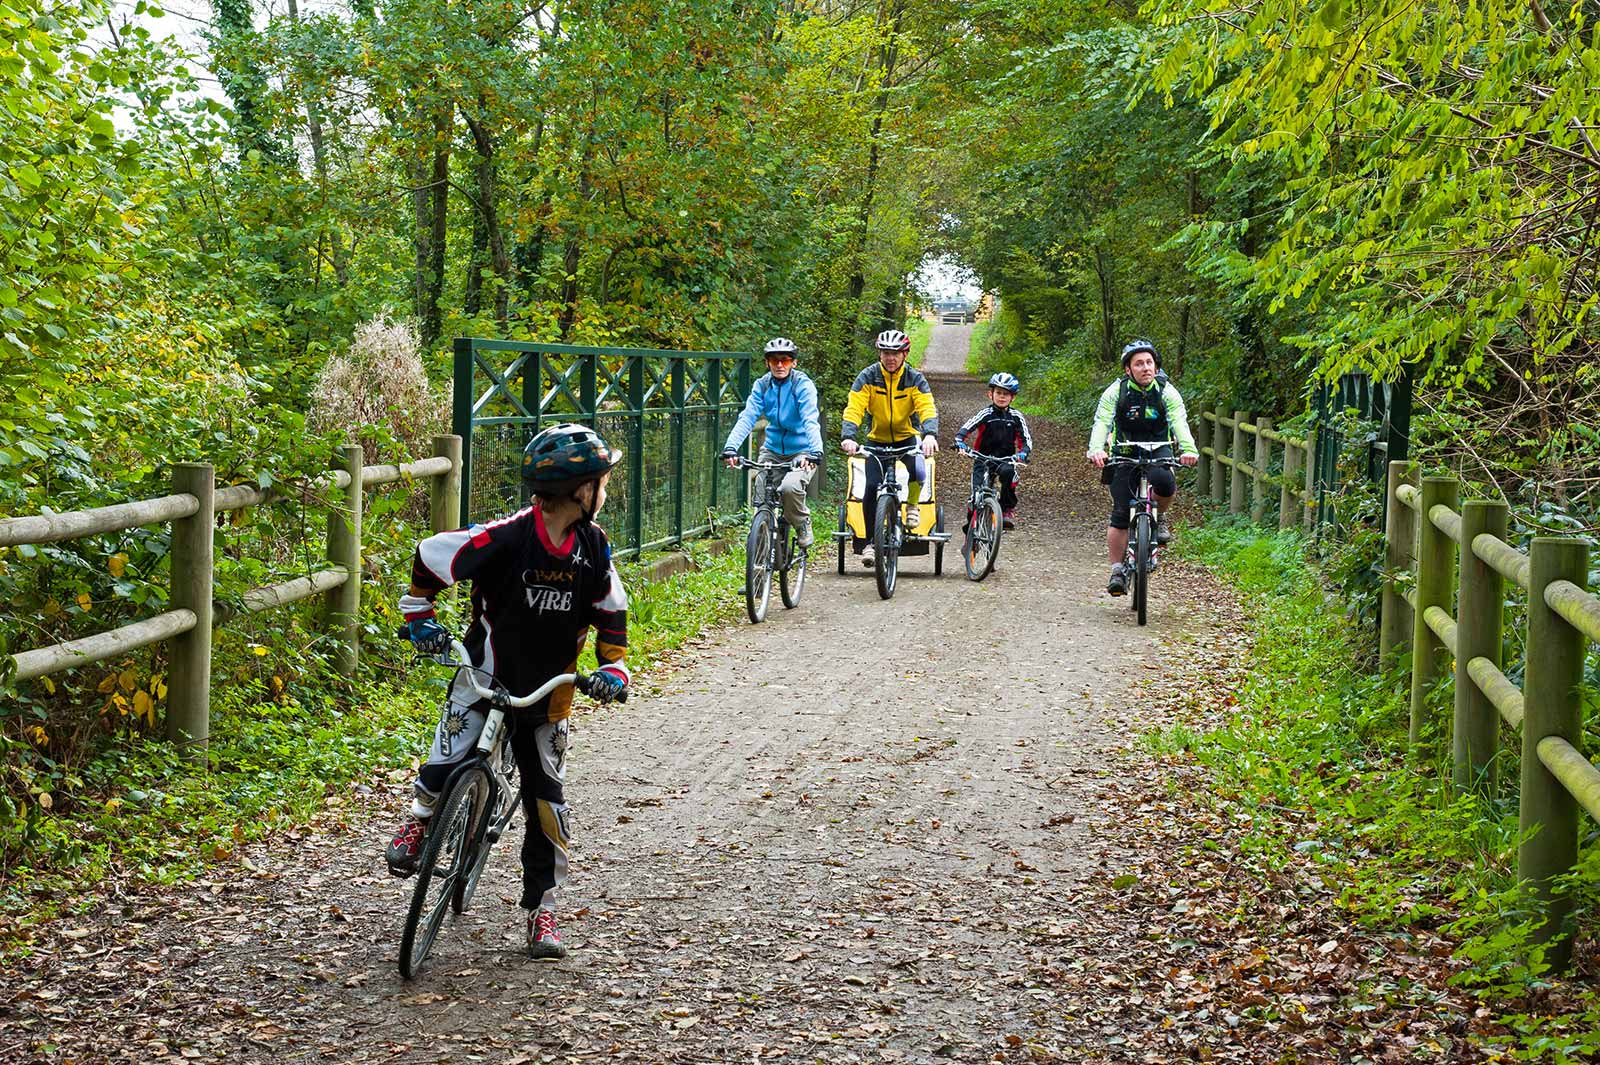 child friendly cycle routes near me